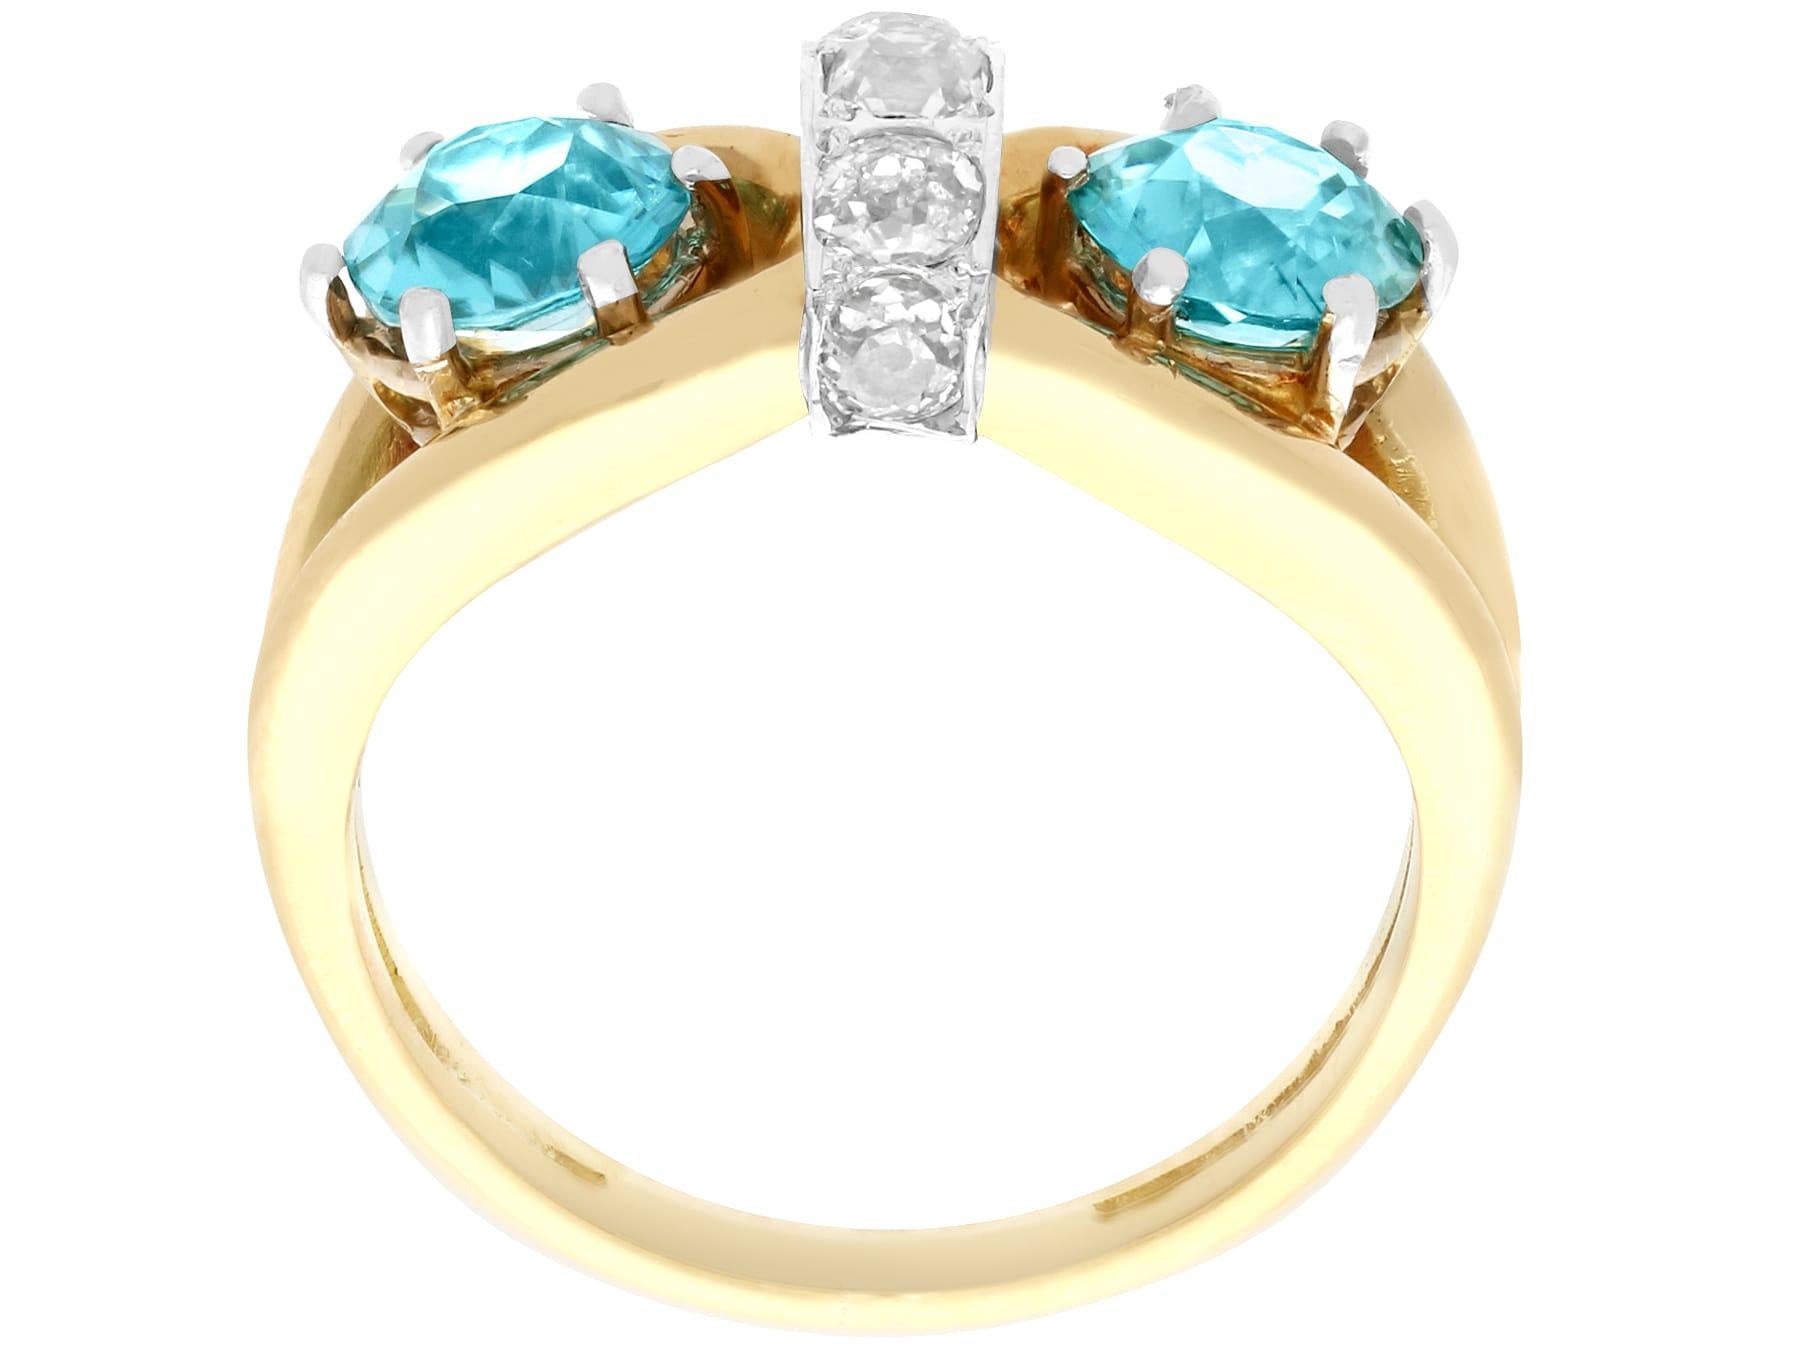 1930's 4.57 Carat High Zircon and Diamond Gold Cocktail Ring In Excellent Condition For Sale In Jesmond, Newcastle Upon Tyne